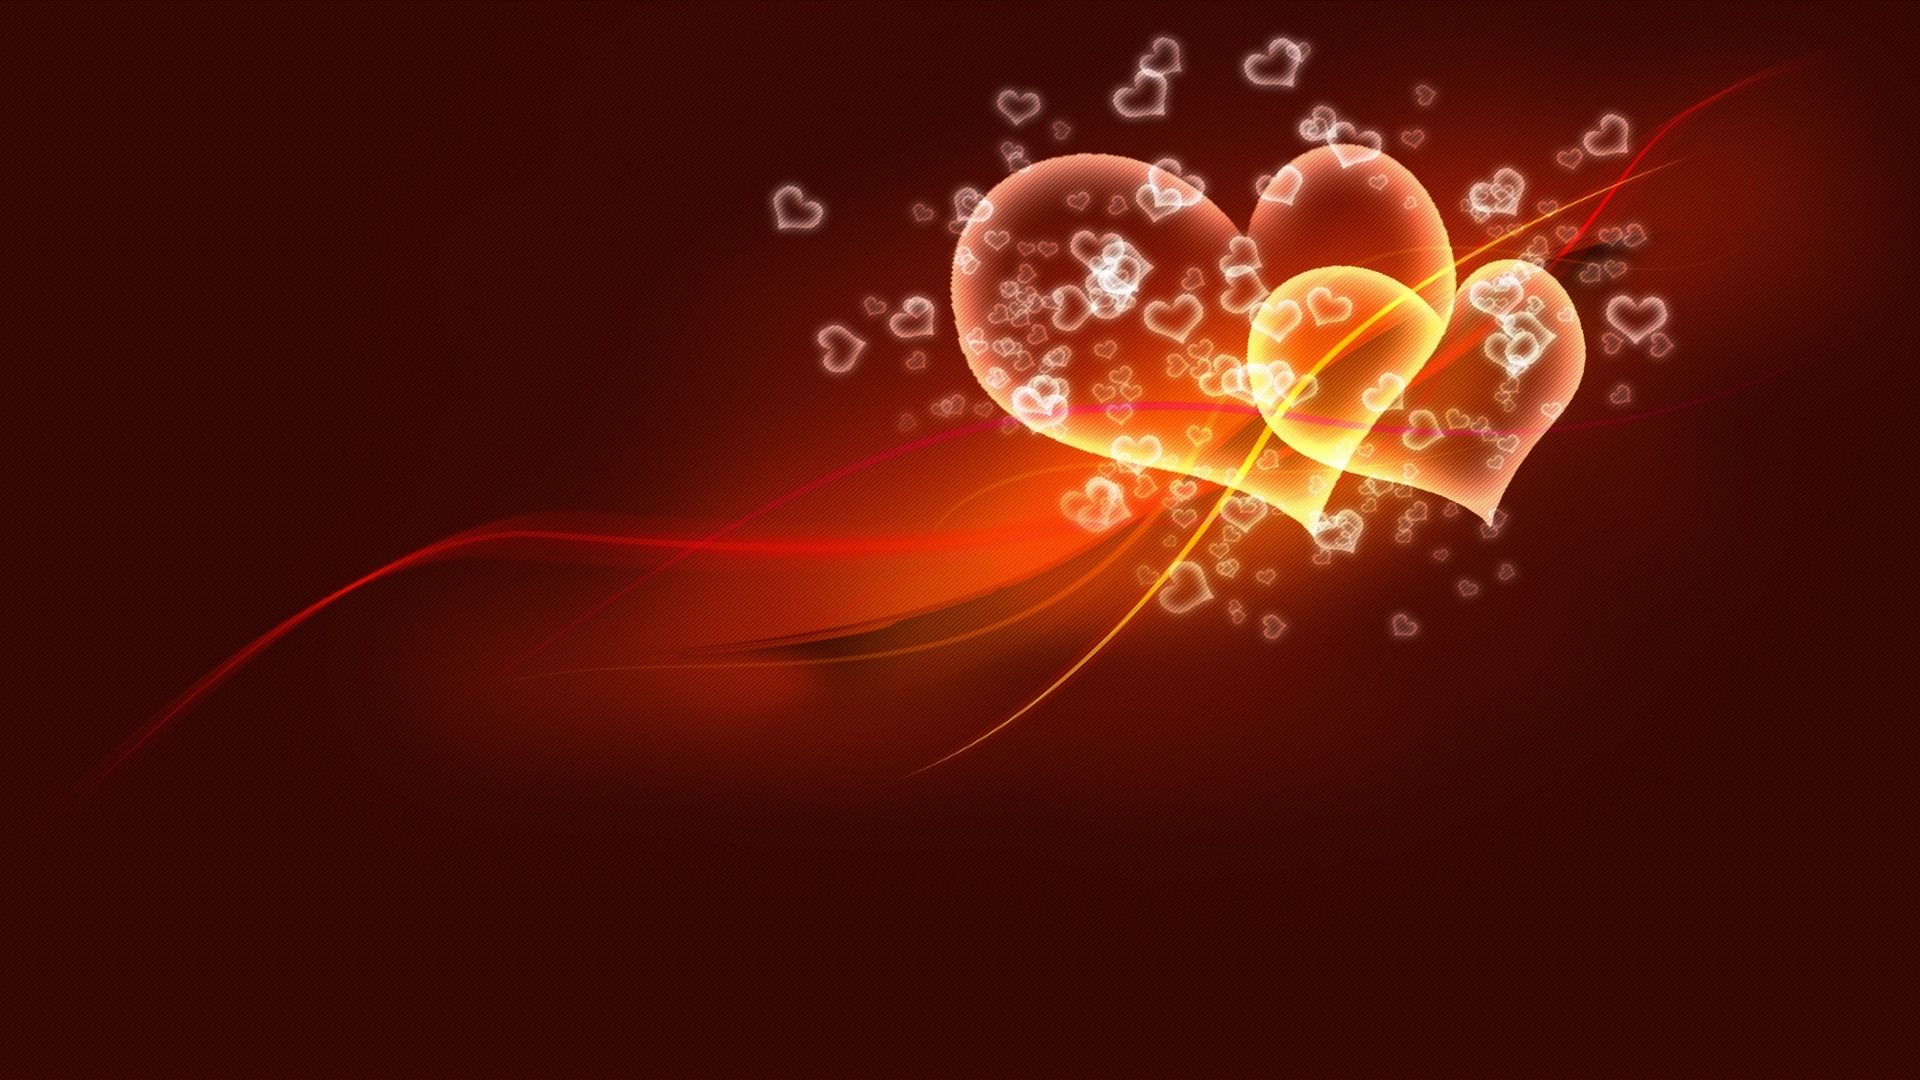 World Best Top 50 Stunning Love Wallpapers Free Download - BlazoMania